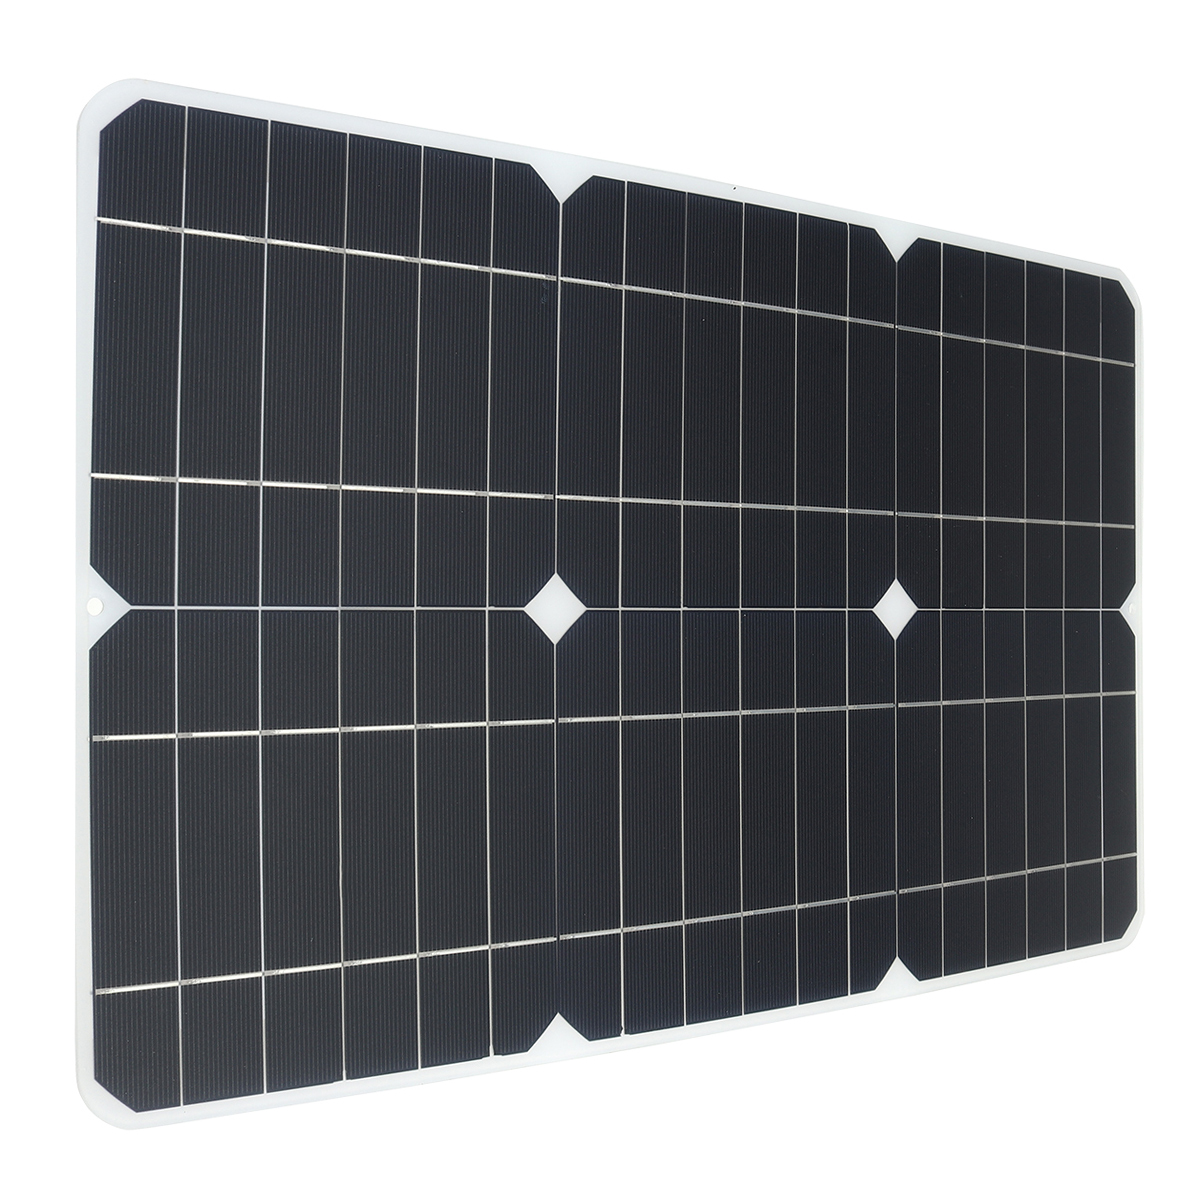 100W-18V-Solar-Panel-Monocrystalline-Silicon-Battery-Charger-Kit-for-Cycling-Climbing-Hiking-Camping-1778312-6